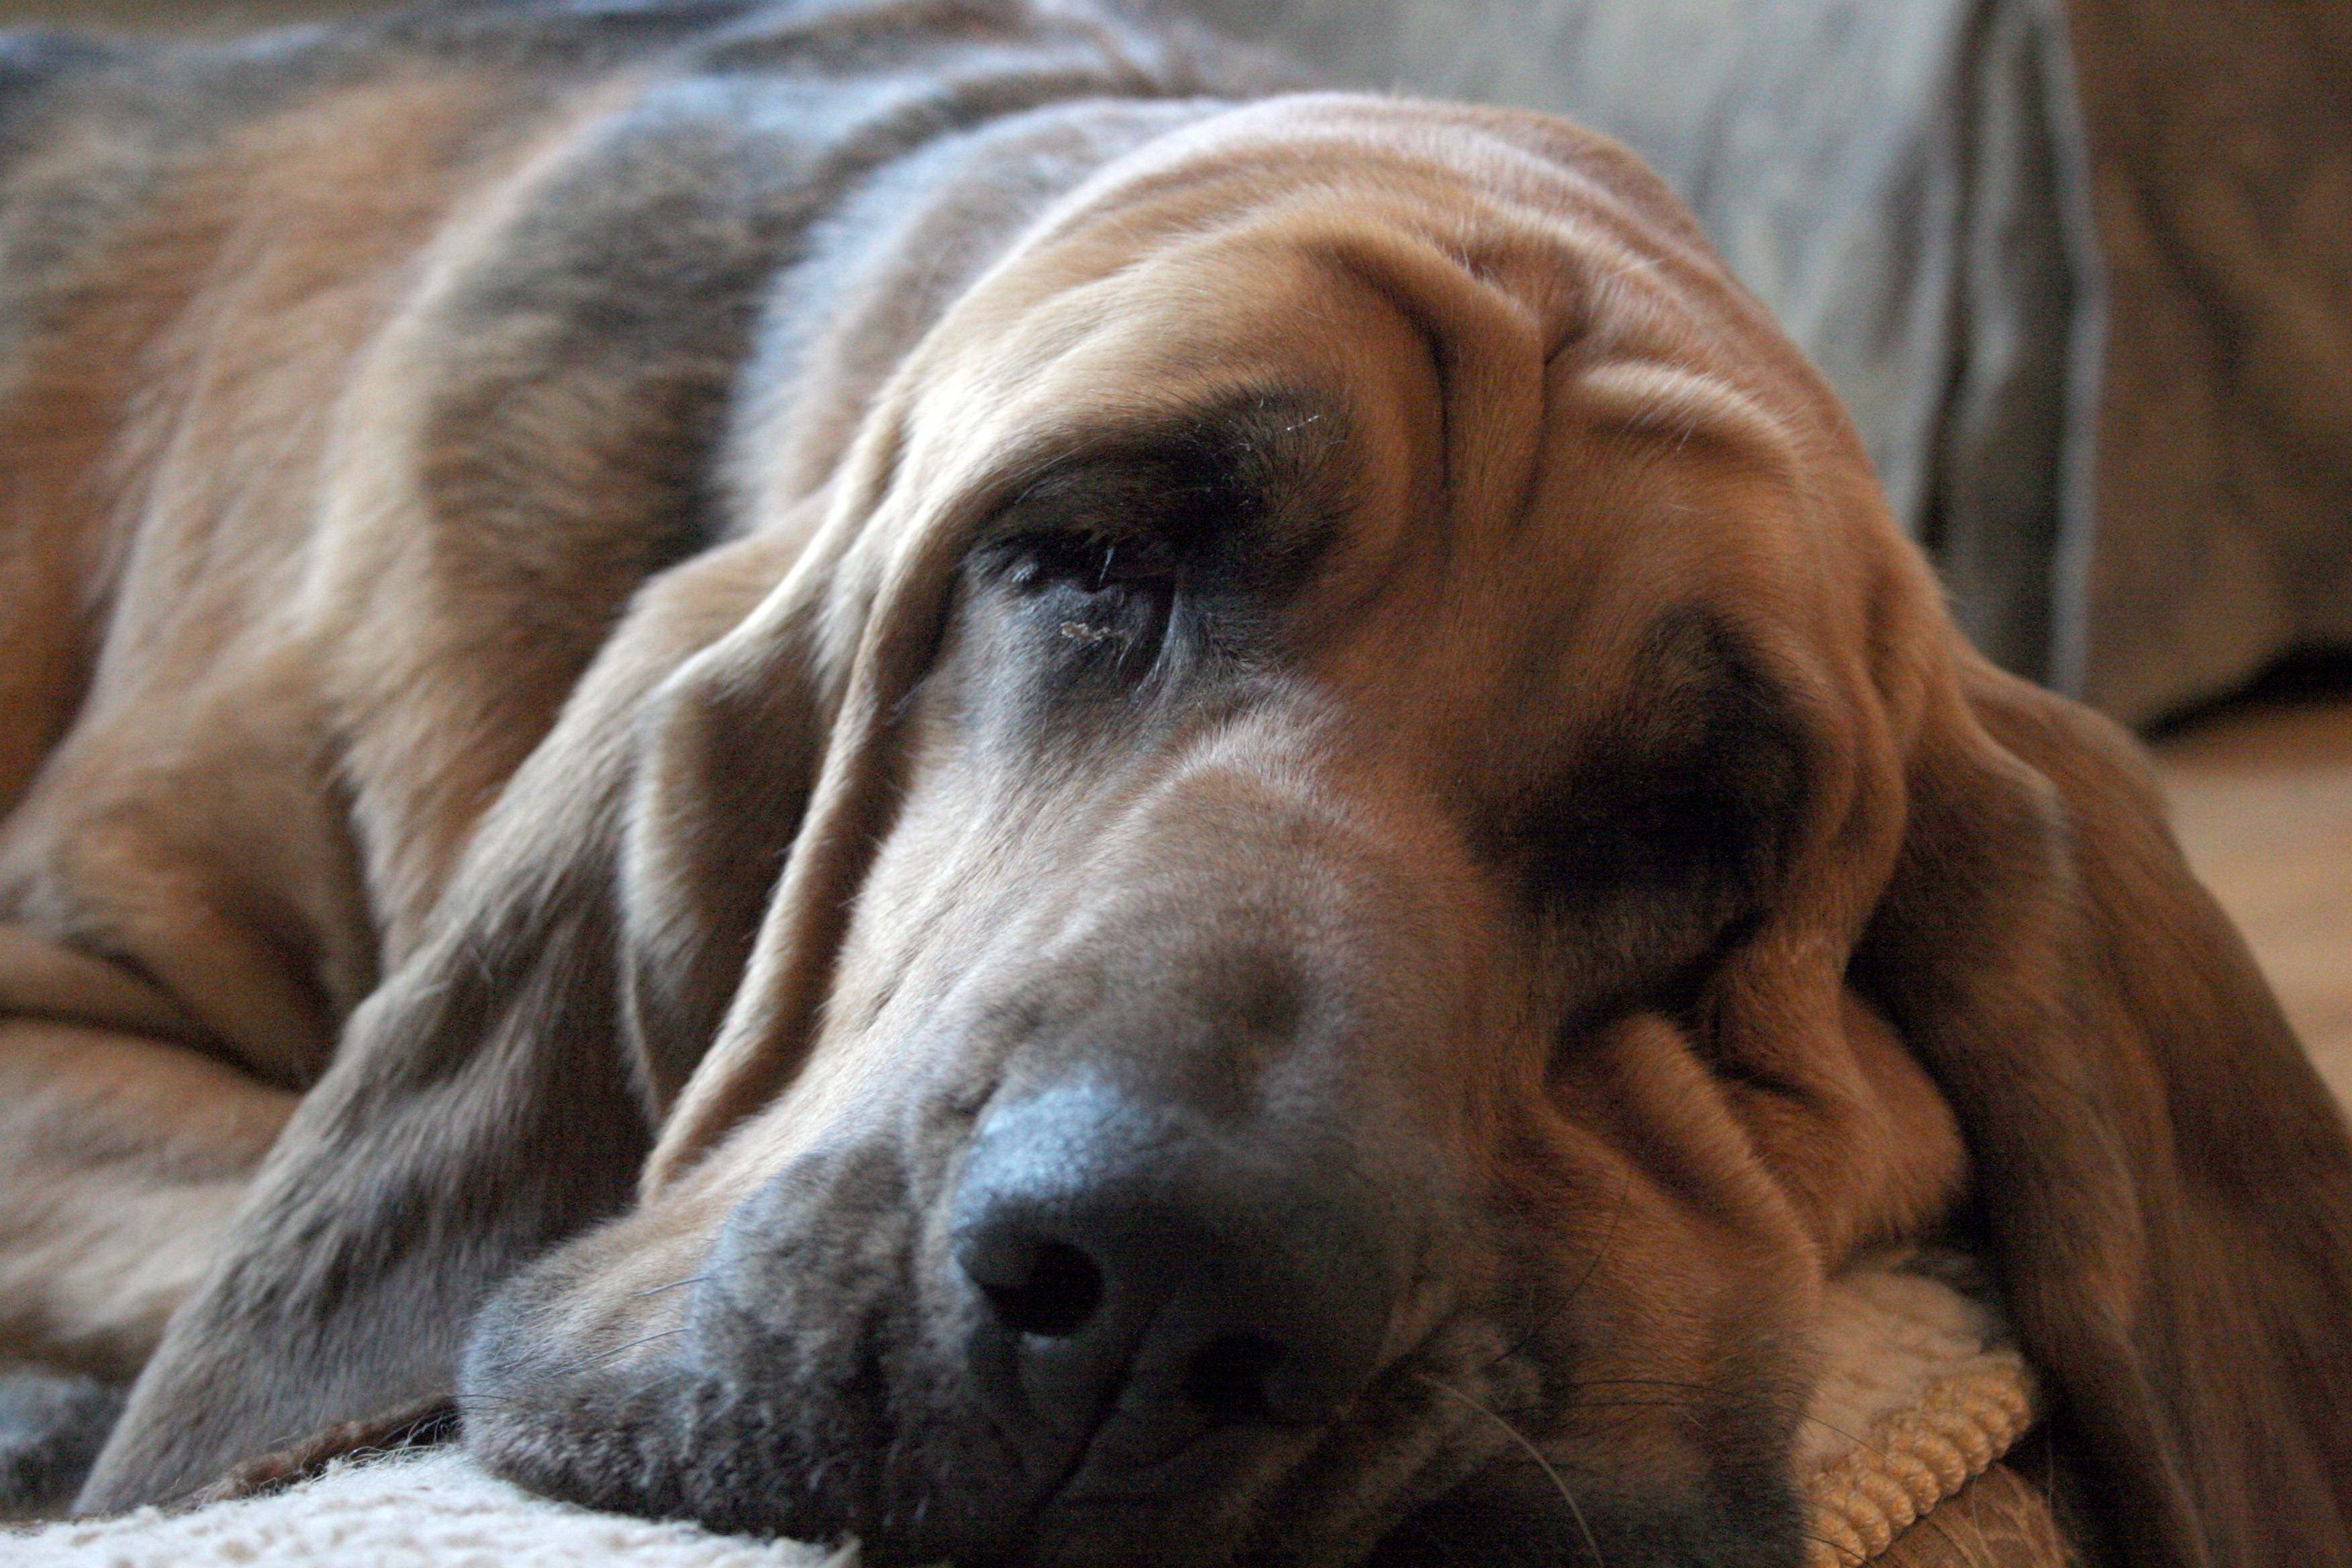 Cute wrinkled Bloodhound face photo and wallpaper. Beautiful Cute